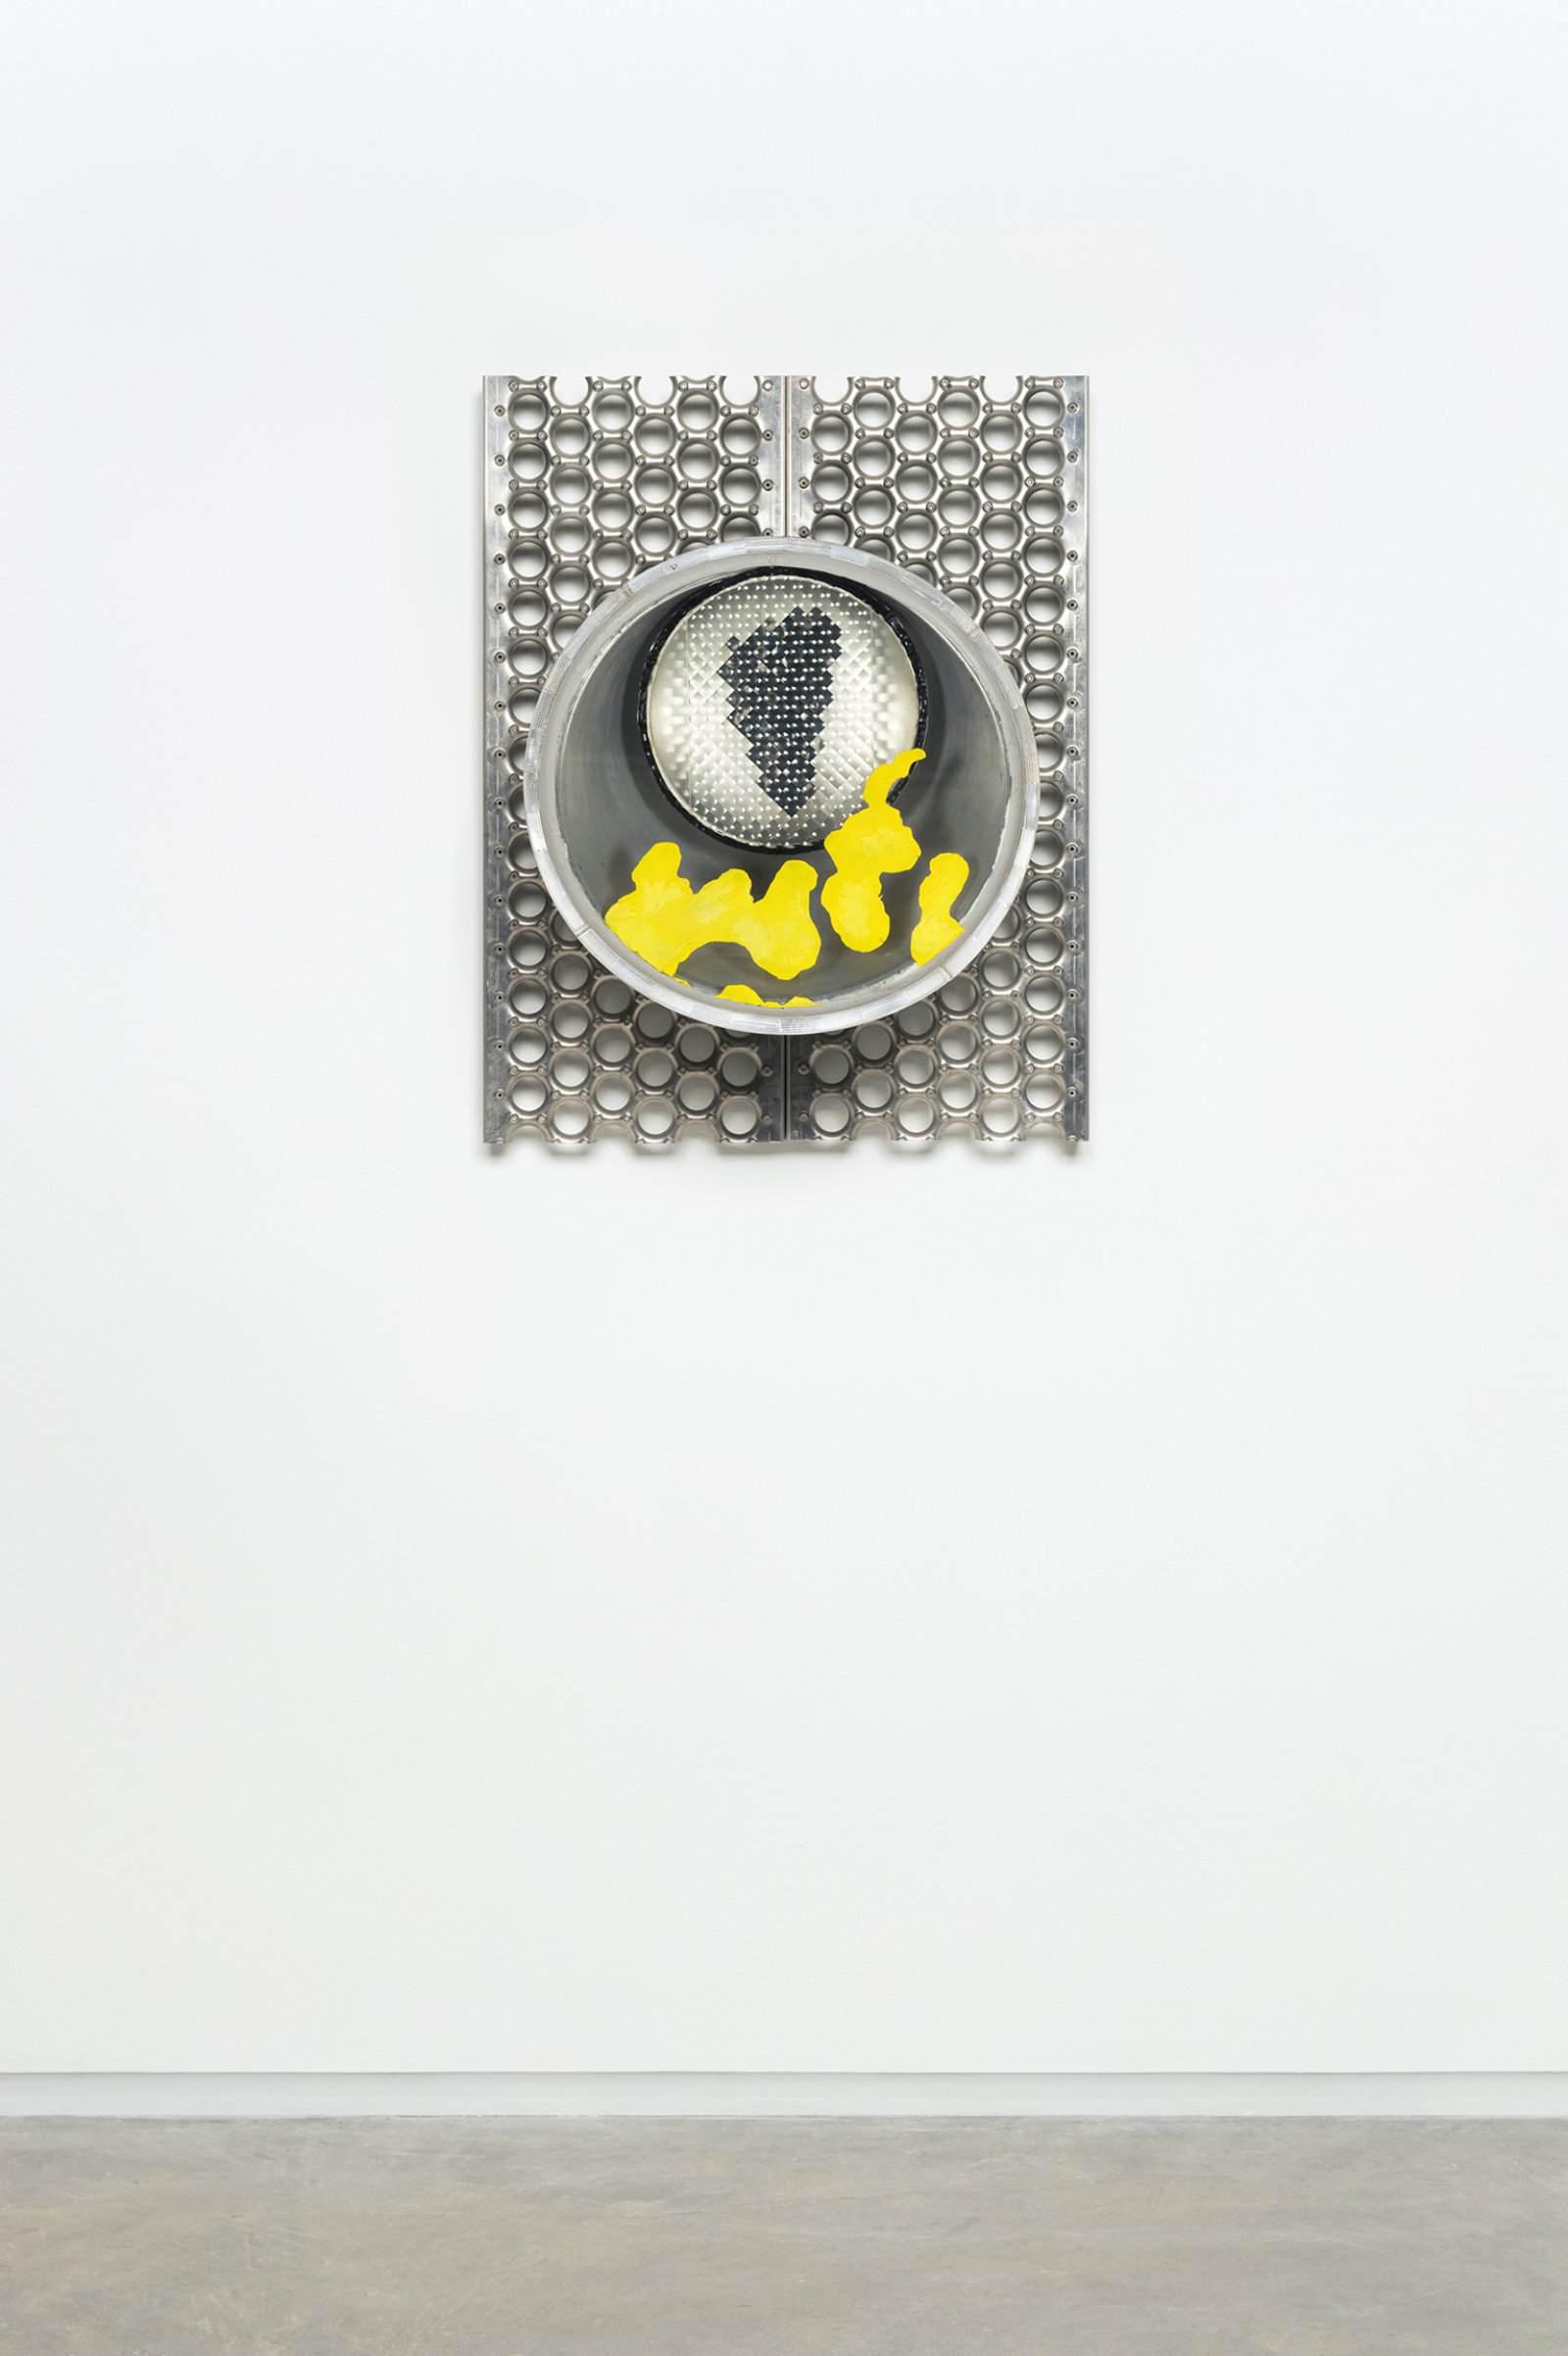 Jerry Pethick, Behind the Sun, 1993–1994, aluminum, reflectors, glass, lens sheet, silicone, 30 x 24 x 19 in. (76 x 61 x 48 cm)